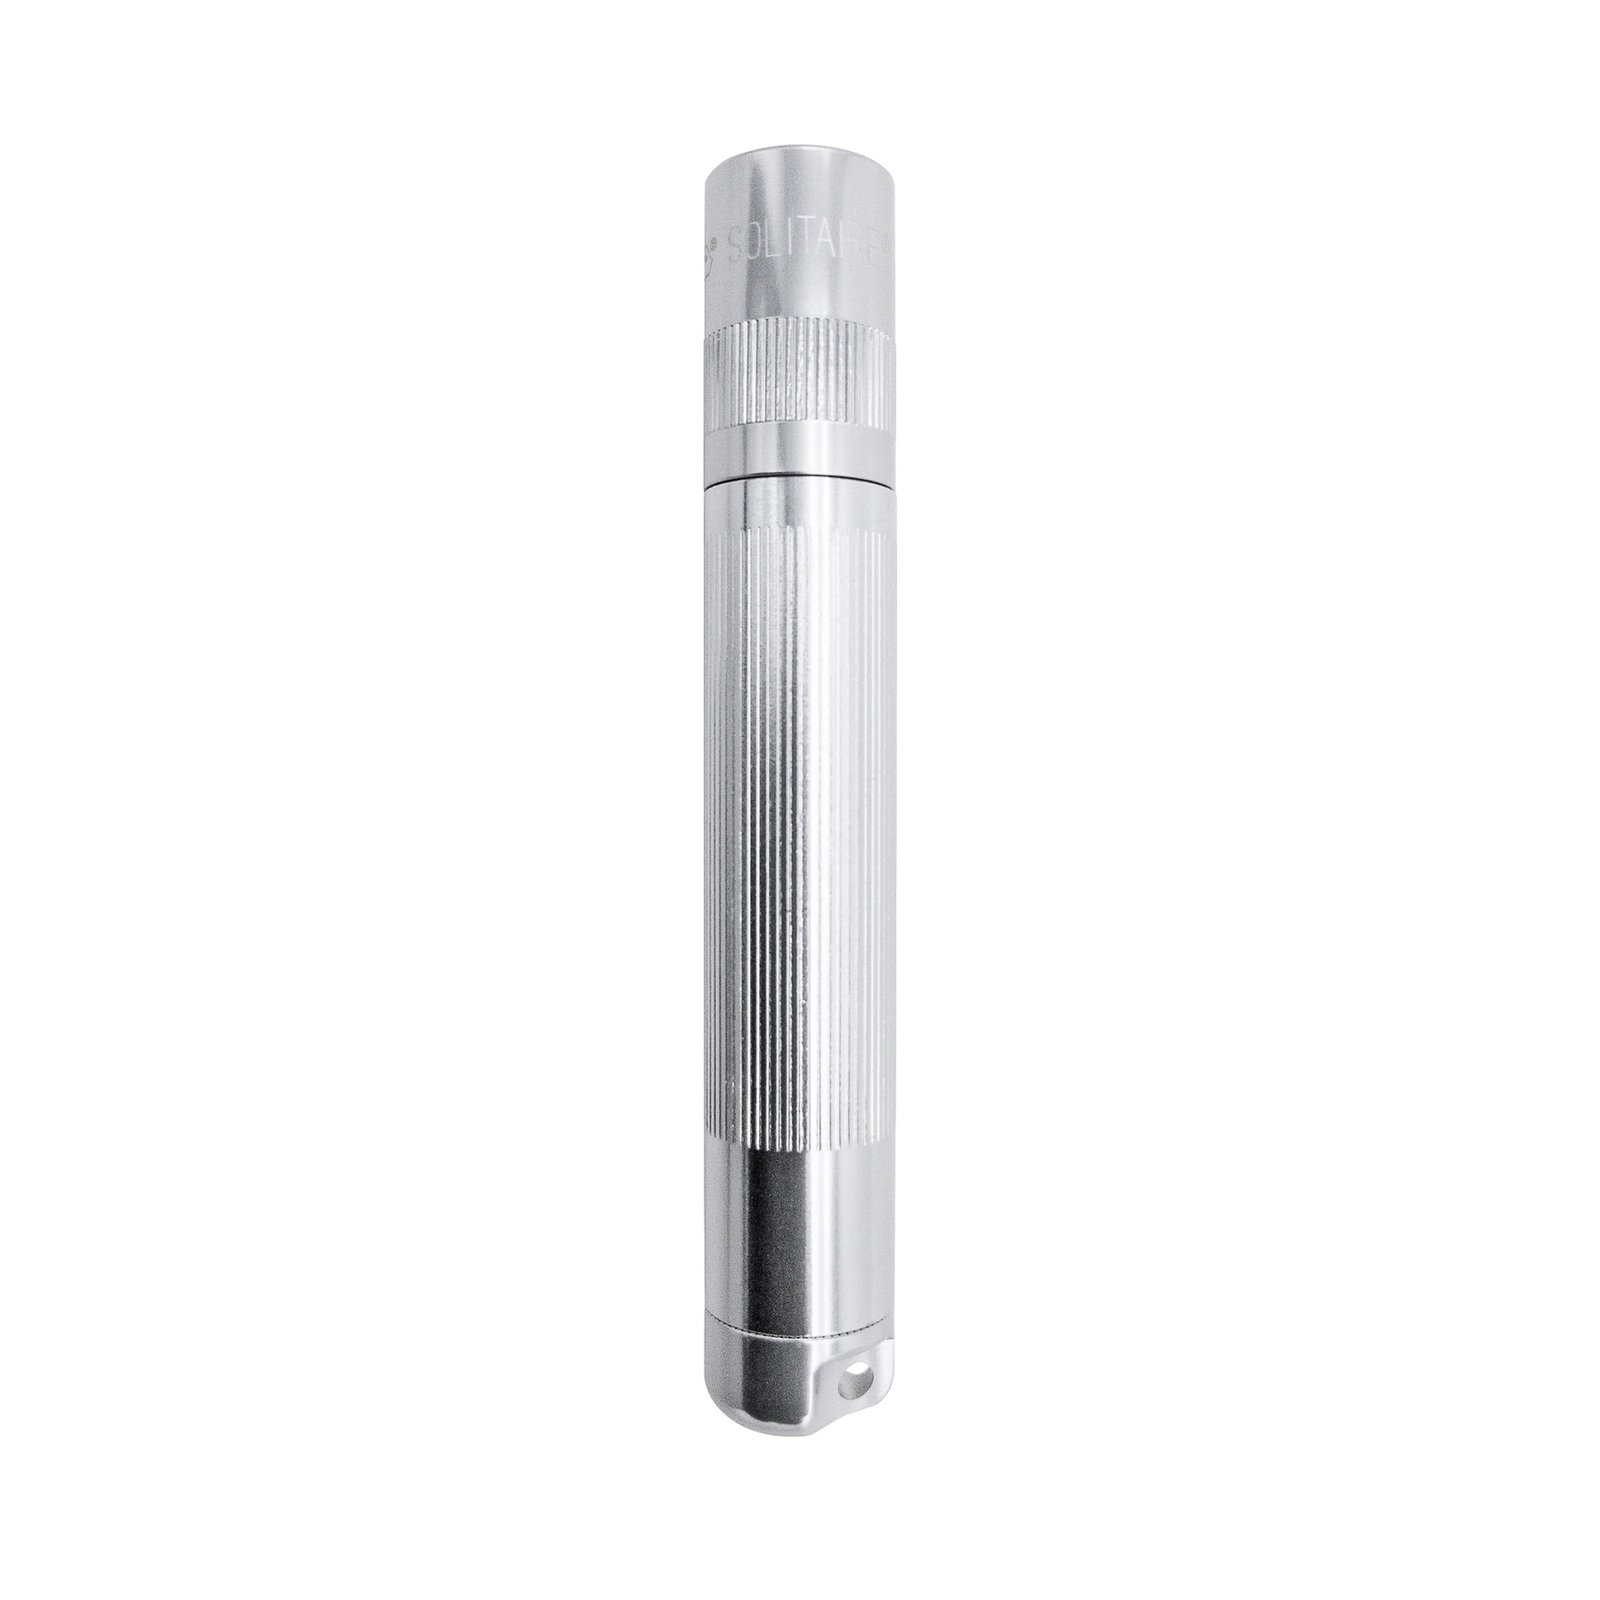 Maglite Xenon-Taschenlampe Solitaire 1-Cell AAA, silber